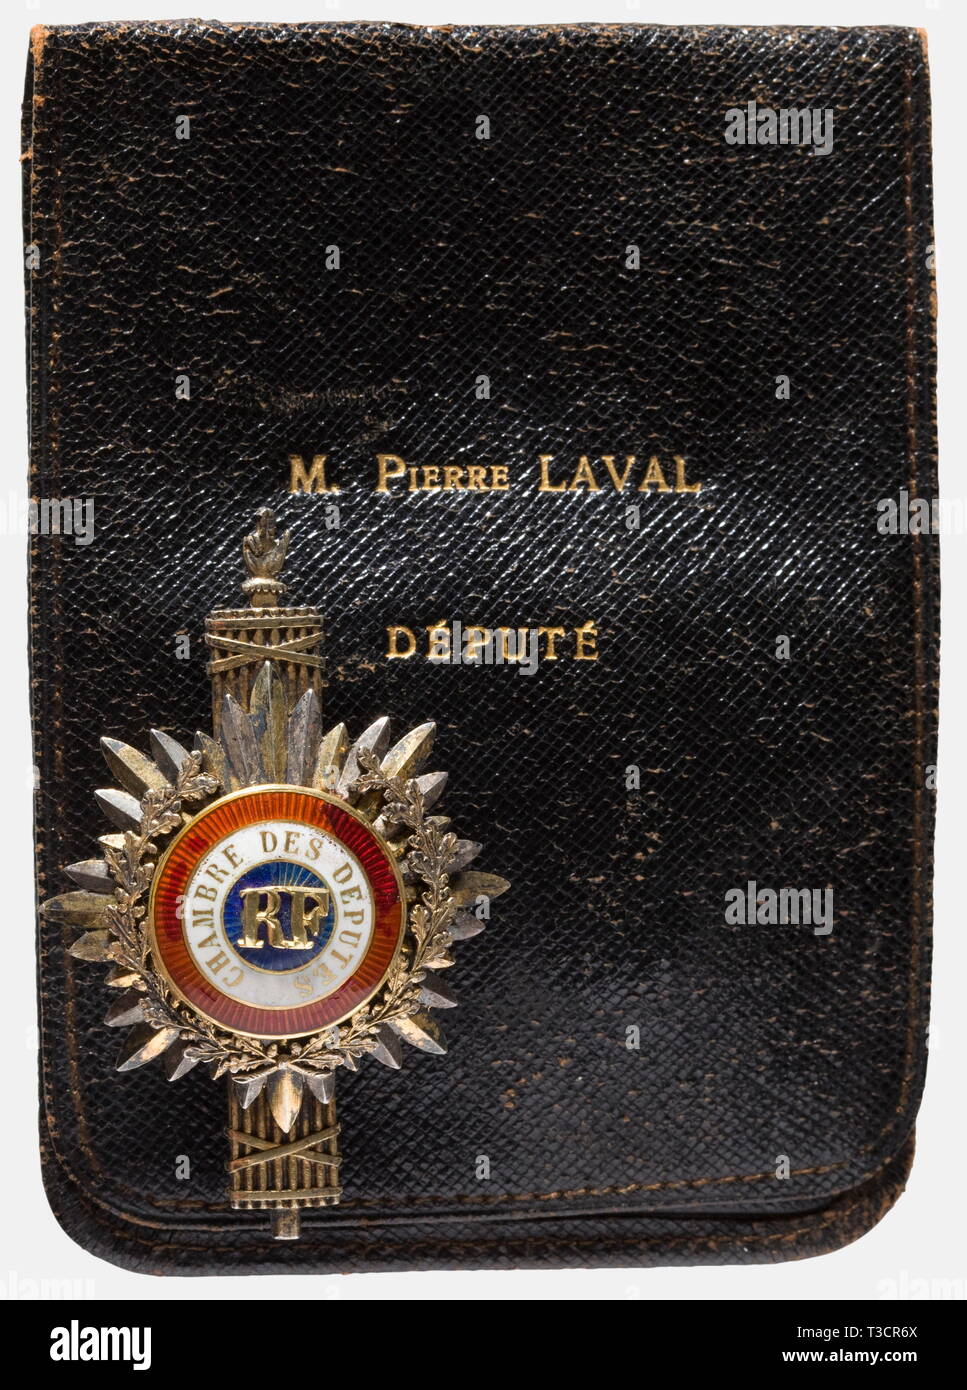 Pierre Laval (1883 - 1945), an official insignia for a deputy, period of the III Republic Gilded silver. Enamelled medallion in the national colours with the surrounding inscription, 'Chambre des Députés' and a gold oak leaf wreath bearing the gilded monogram 'RF' above one fasces. The maker's mark and hallmark are engraved on the back. In a leather case with the name, 'M. Pierre Laval, Député,' stamped in gold. Dimensions 6.5 cm x 4 cm. Weight 25.5 g. Enamel and monogram somewhat damaged. Pierre Laval was elected Deputy for the Department of the, Additional-Rights-Clearance-Info-Not-Available Stock Photo